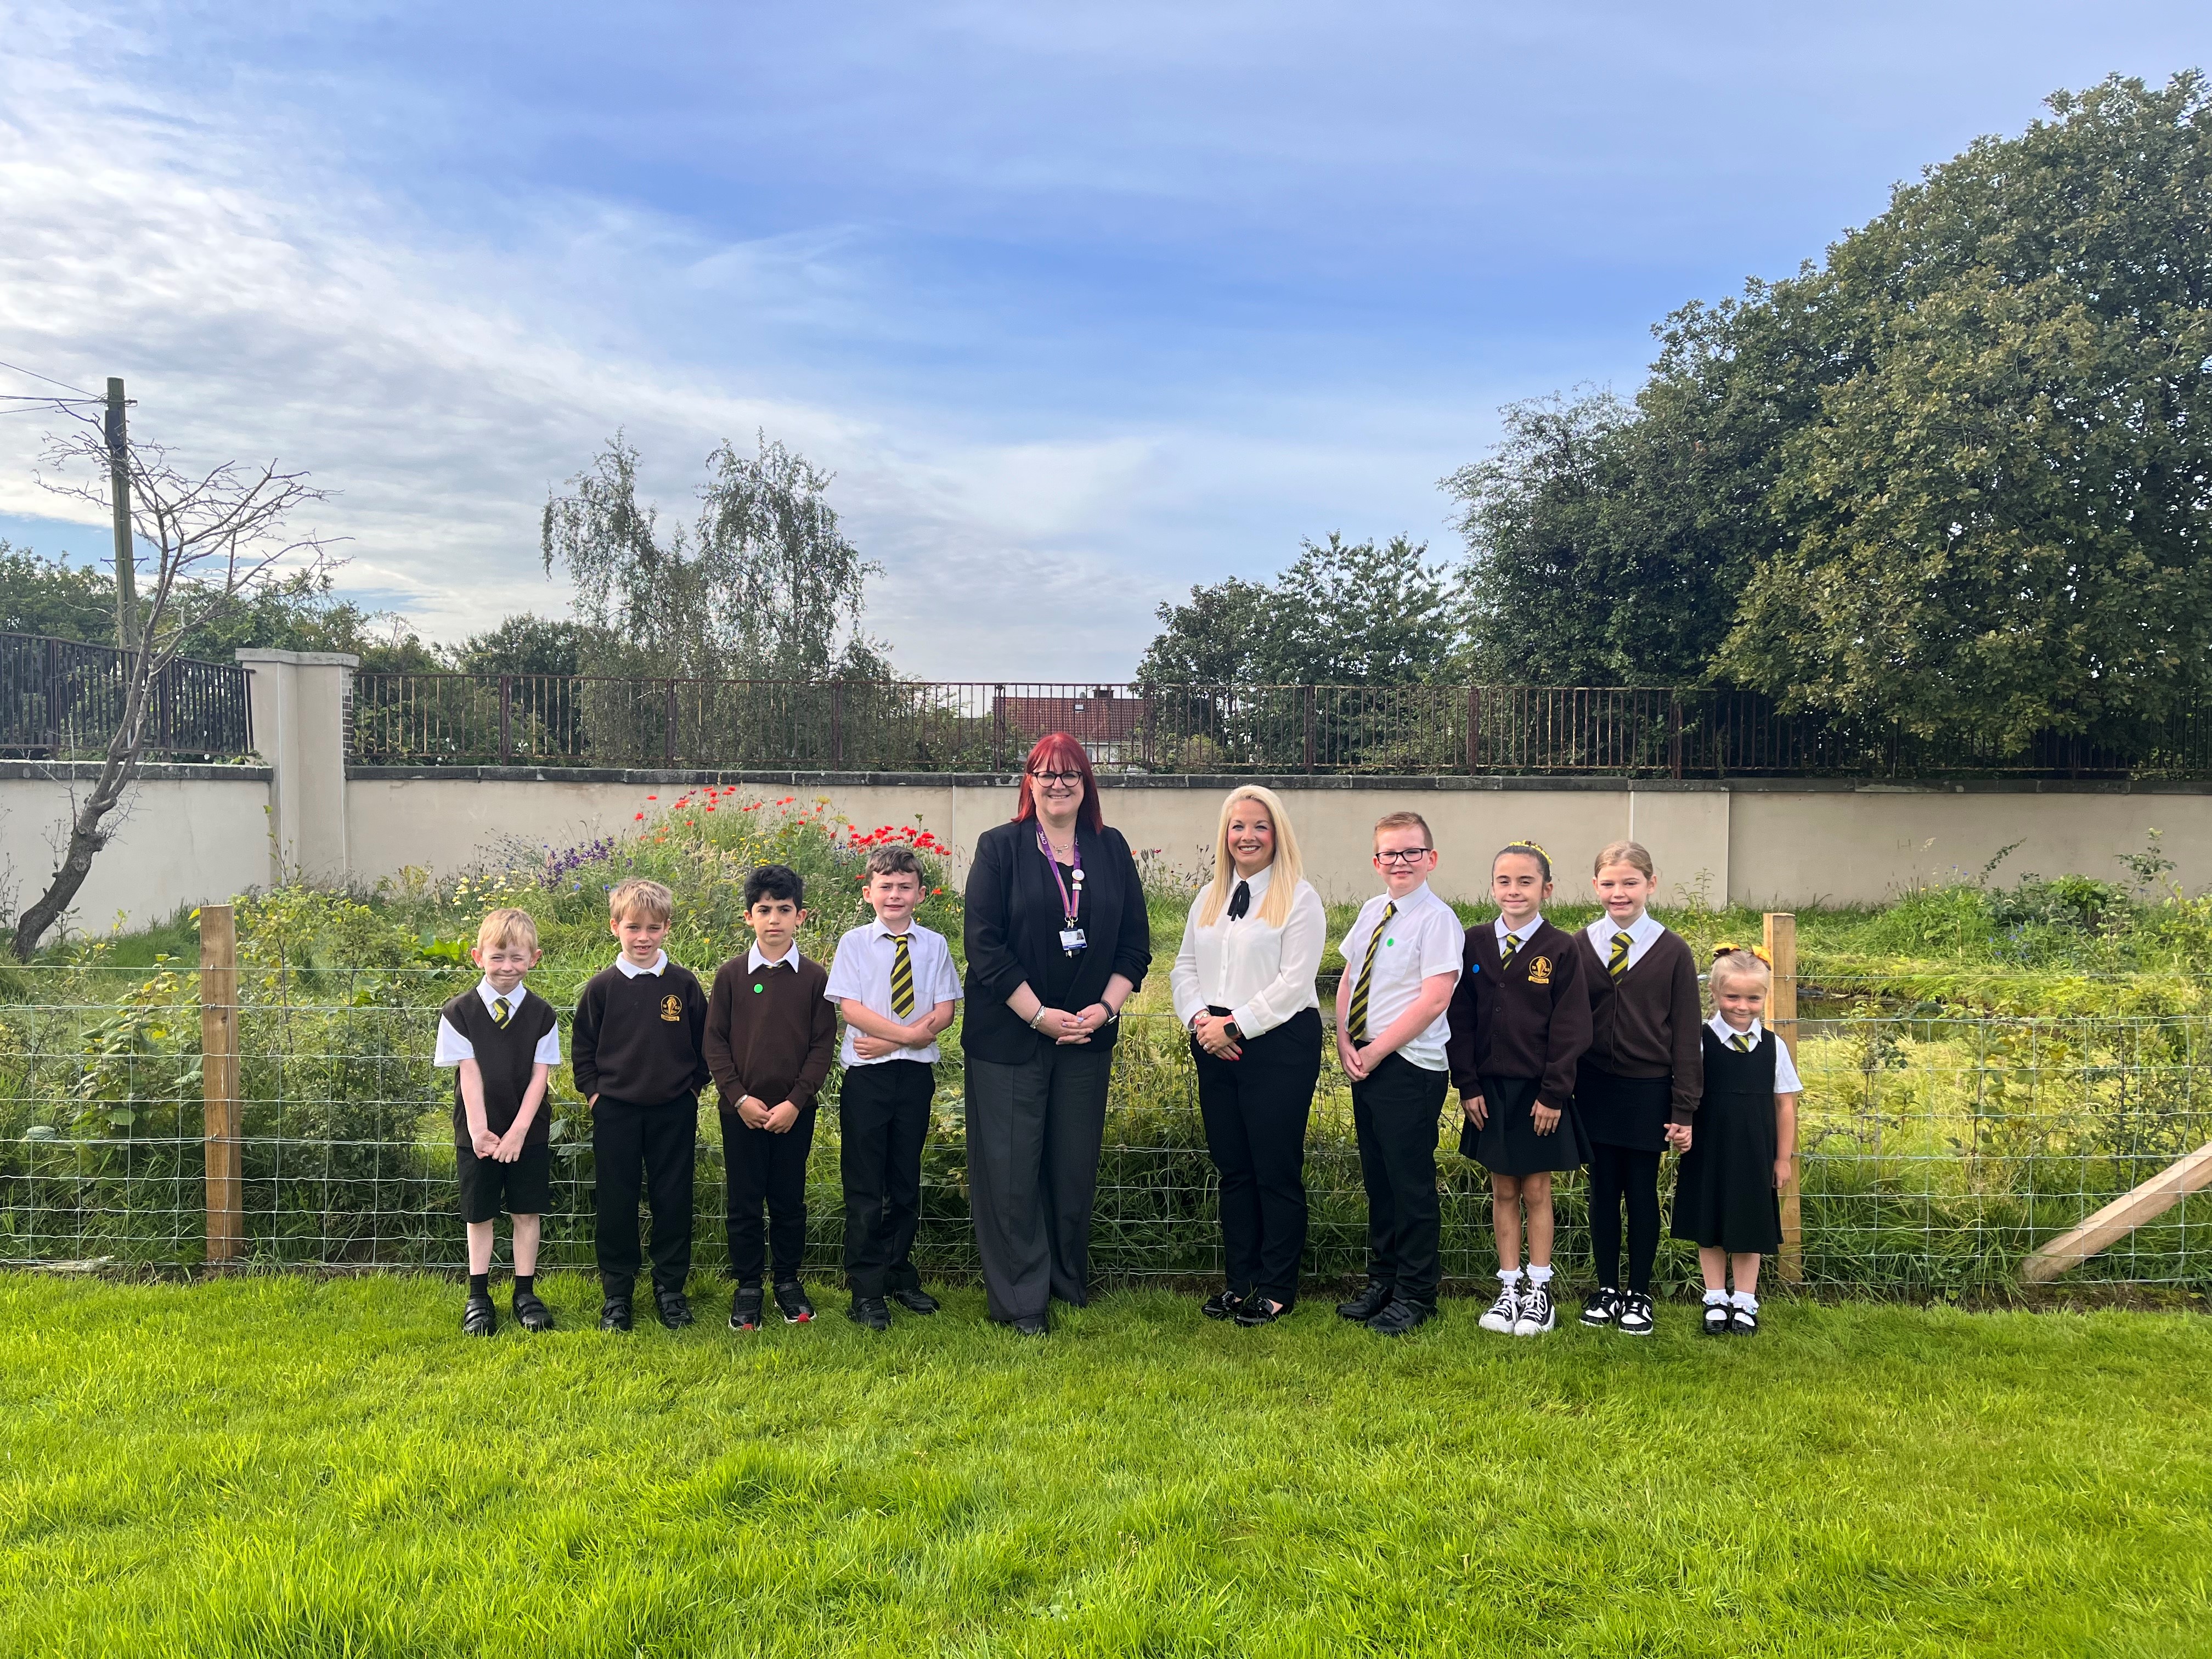 linnvale primary good inspection